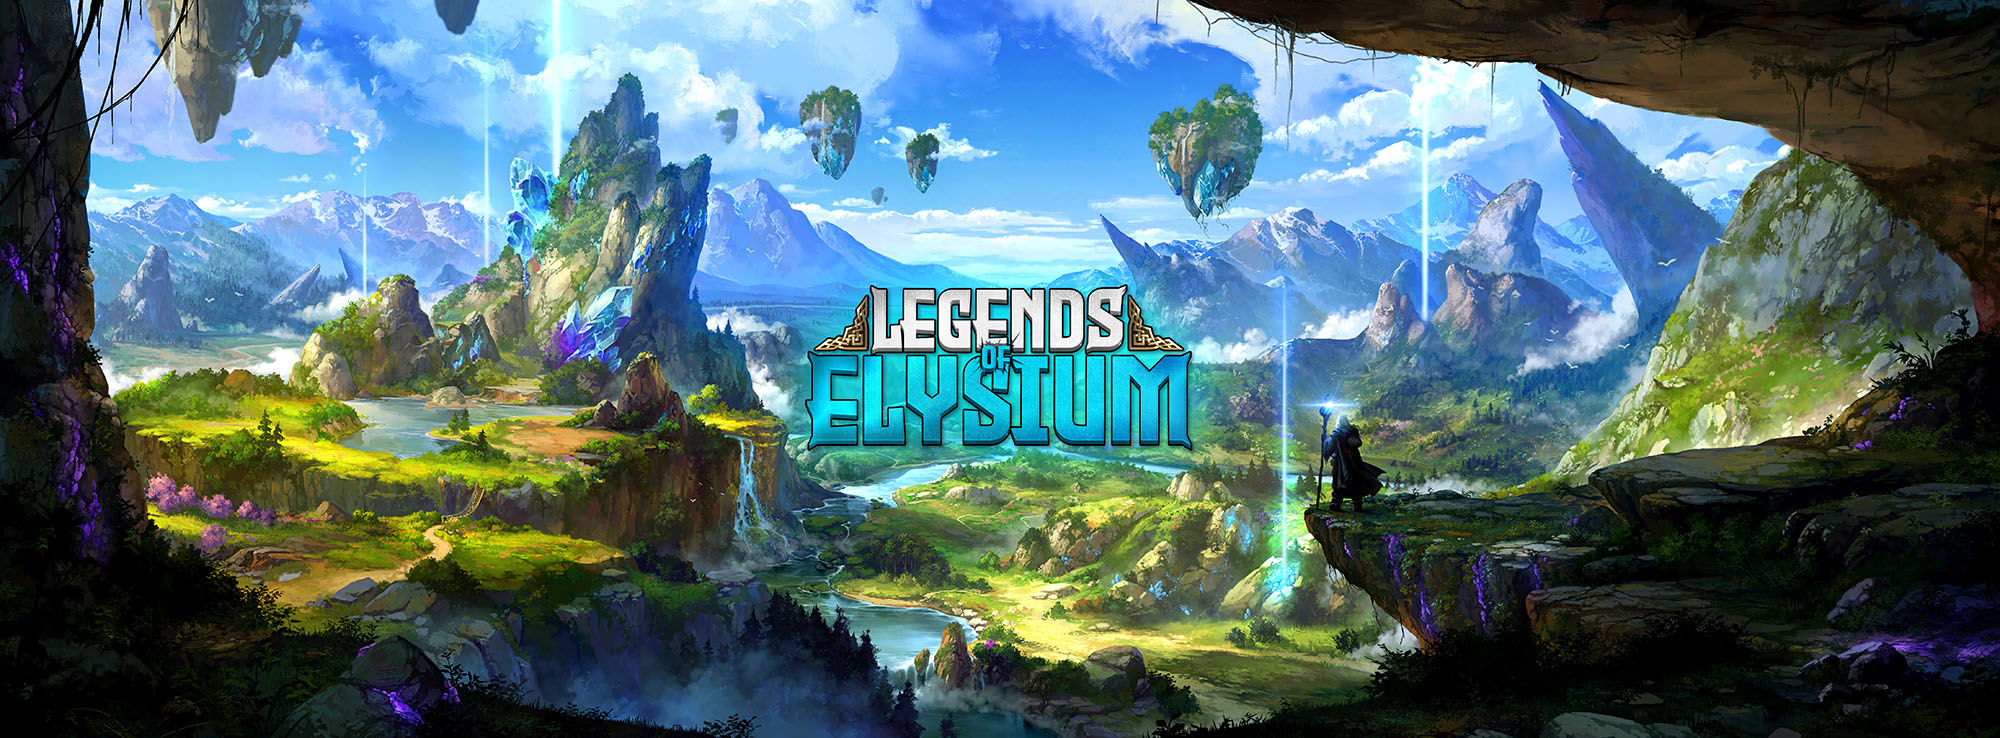 Overview of Legends of Elysium - FTP new TCG game. Legends of Elysium is an online card game set in a fantasy world. It is an entertaining Free-To-Play production, where players compete in epic card battles. Players create their own custom decks and devise thoughtful strategies to outsmart opponents and gain an advantage on the board.